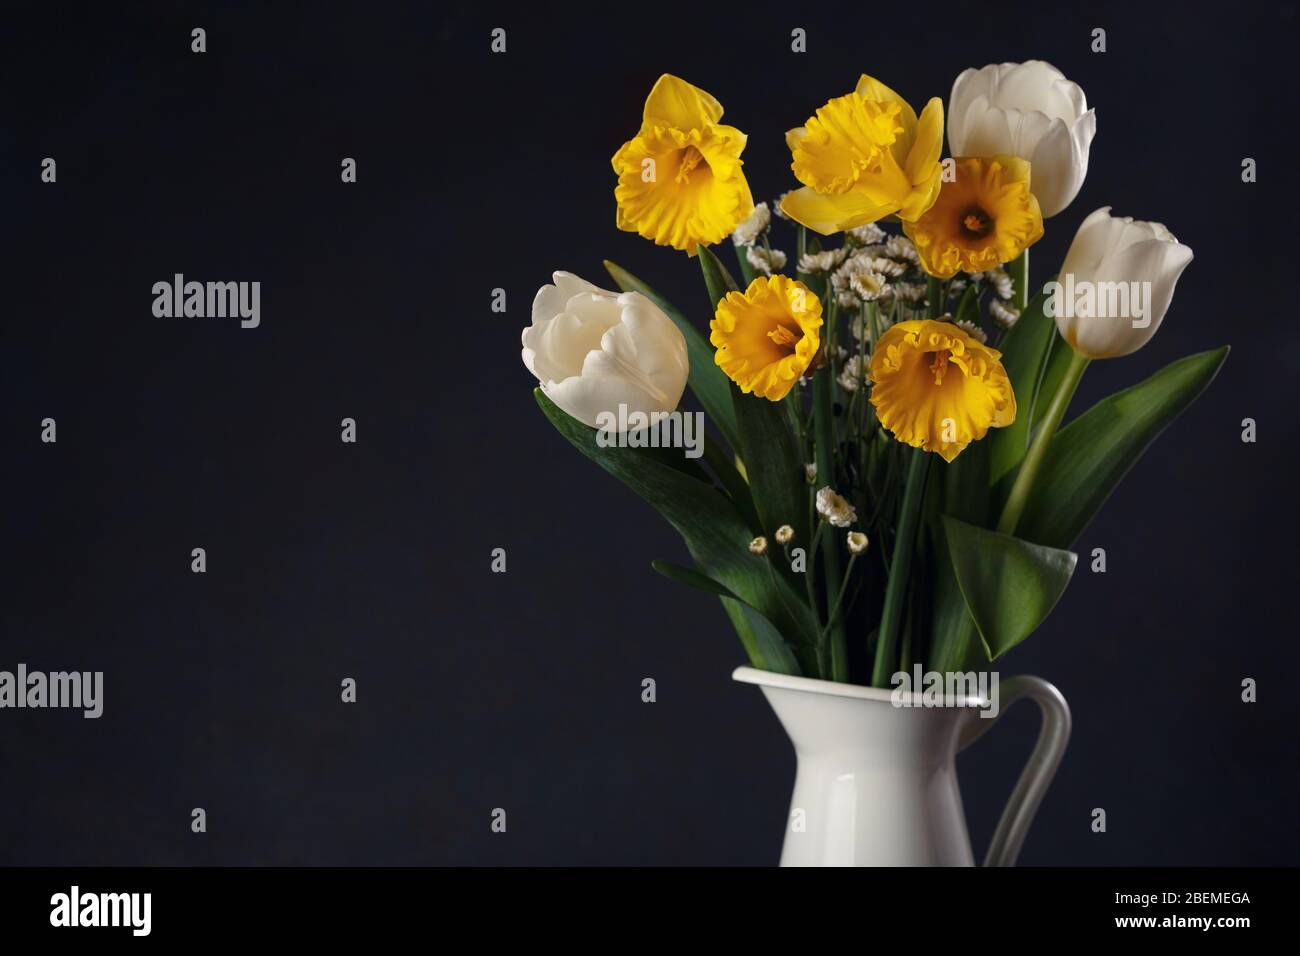 Fresh bouquet of yellow daffodils and white tulips in vase on black table. Springtime still life concept. Stock Photo